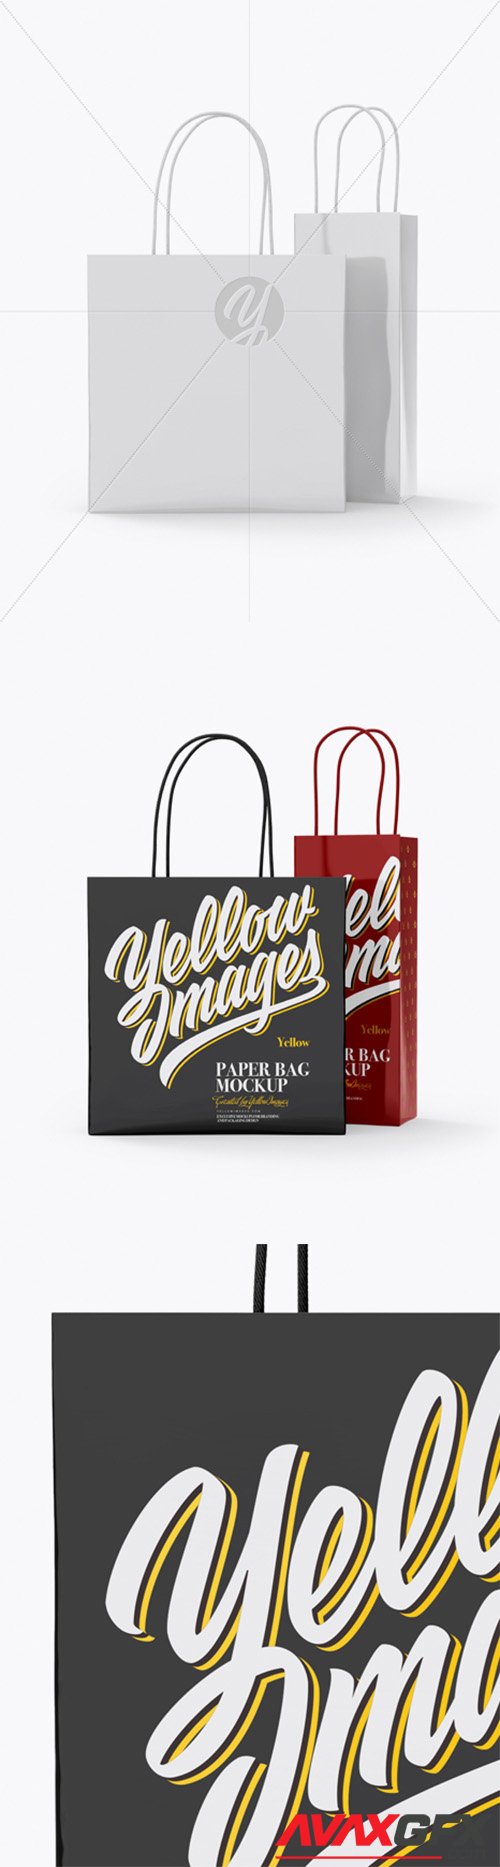 Two Glossy Paper Bags Mockup - Half Side View 27793